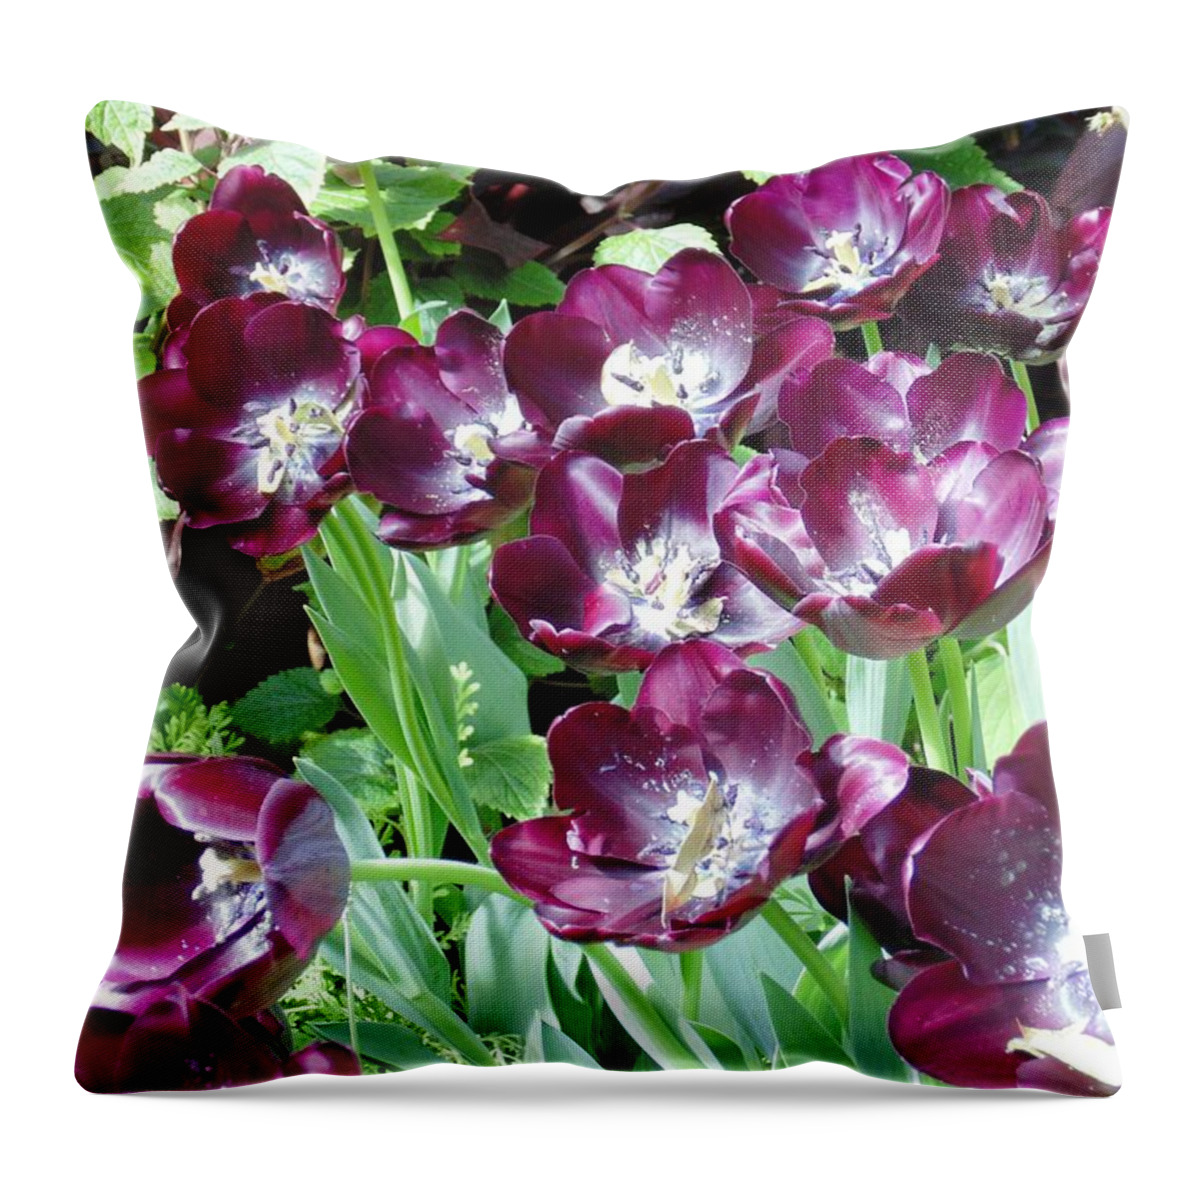 Floral Throw Pillow featuring the photograph Black Tulips by Karin Dawn Kelshall- Best